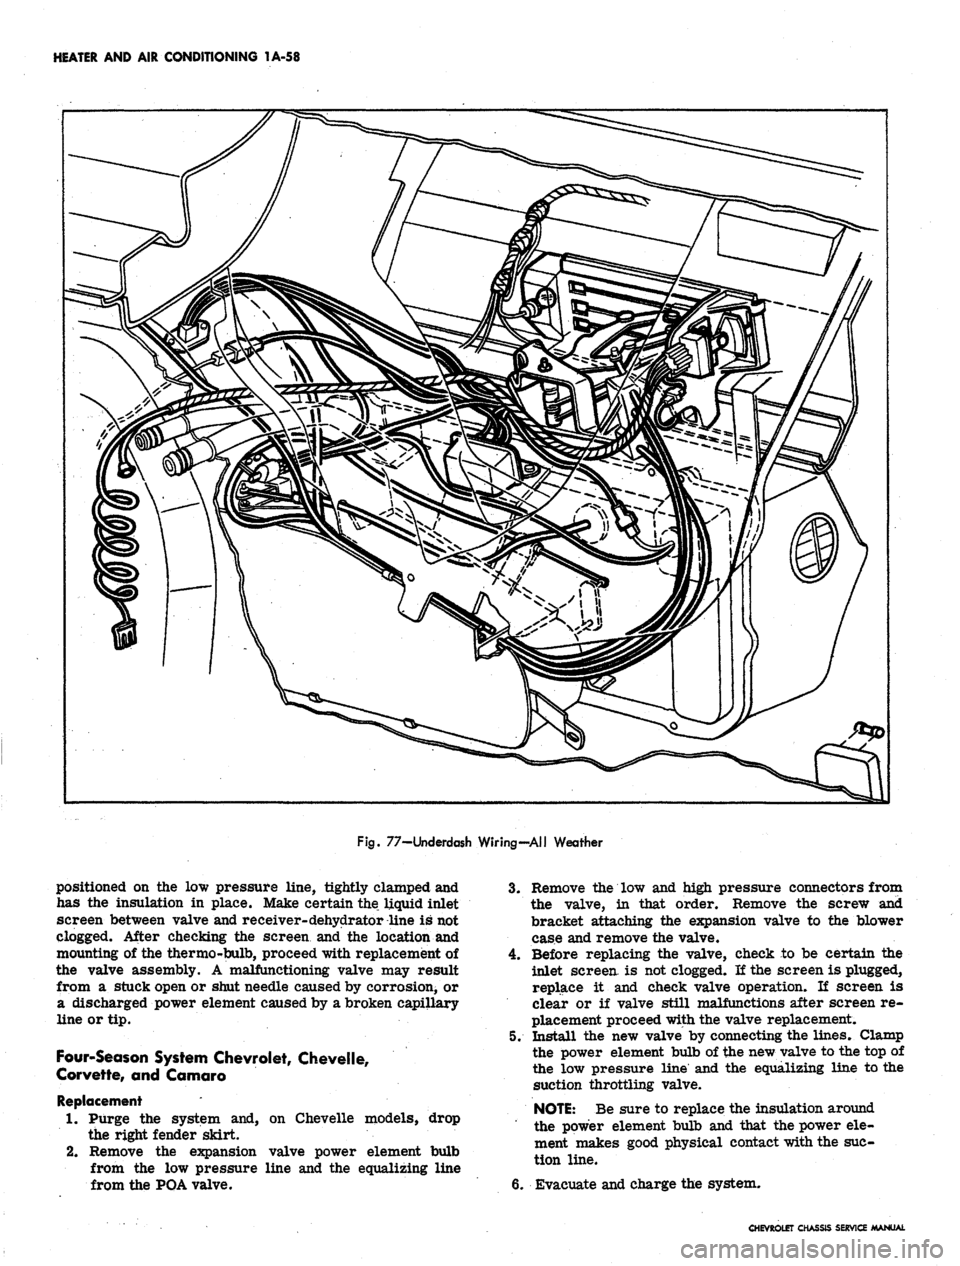 CHEVROLET CAMARO 1967 1.G Chassis Workshop Manual 
HEATER AND AIR CONDITIONING 1A-58

Fig.
 77-Underdash Wiring-All Weather

positioned on the low pressure line, tightly clamped and

has the insulation in place. Make certain the liquid inlet

screen 